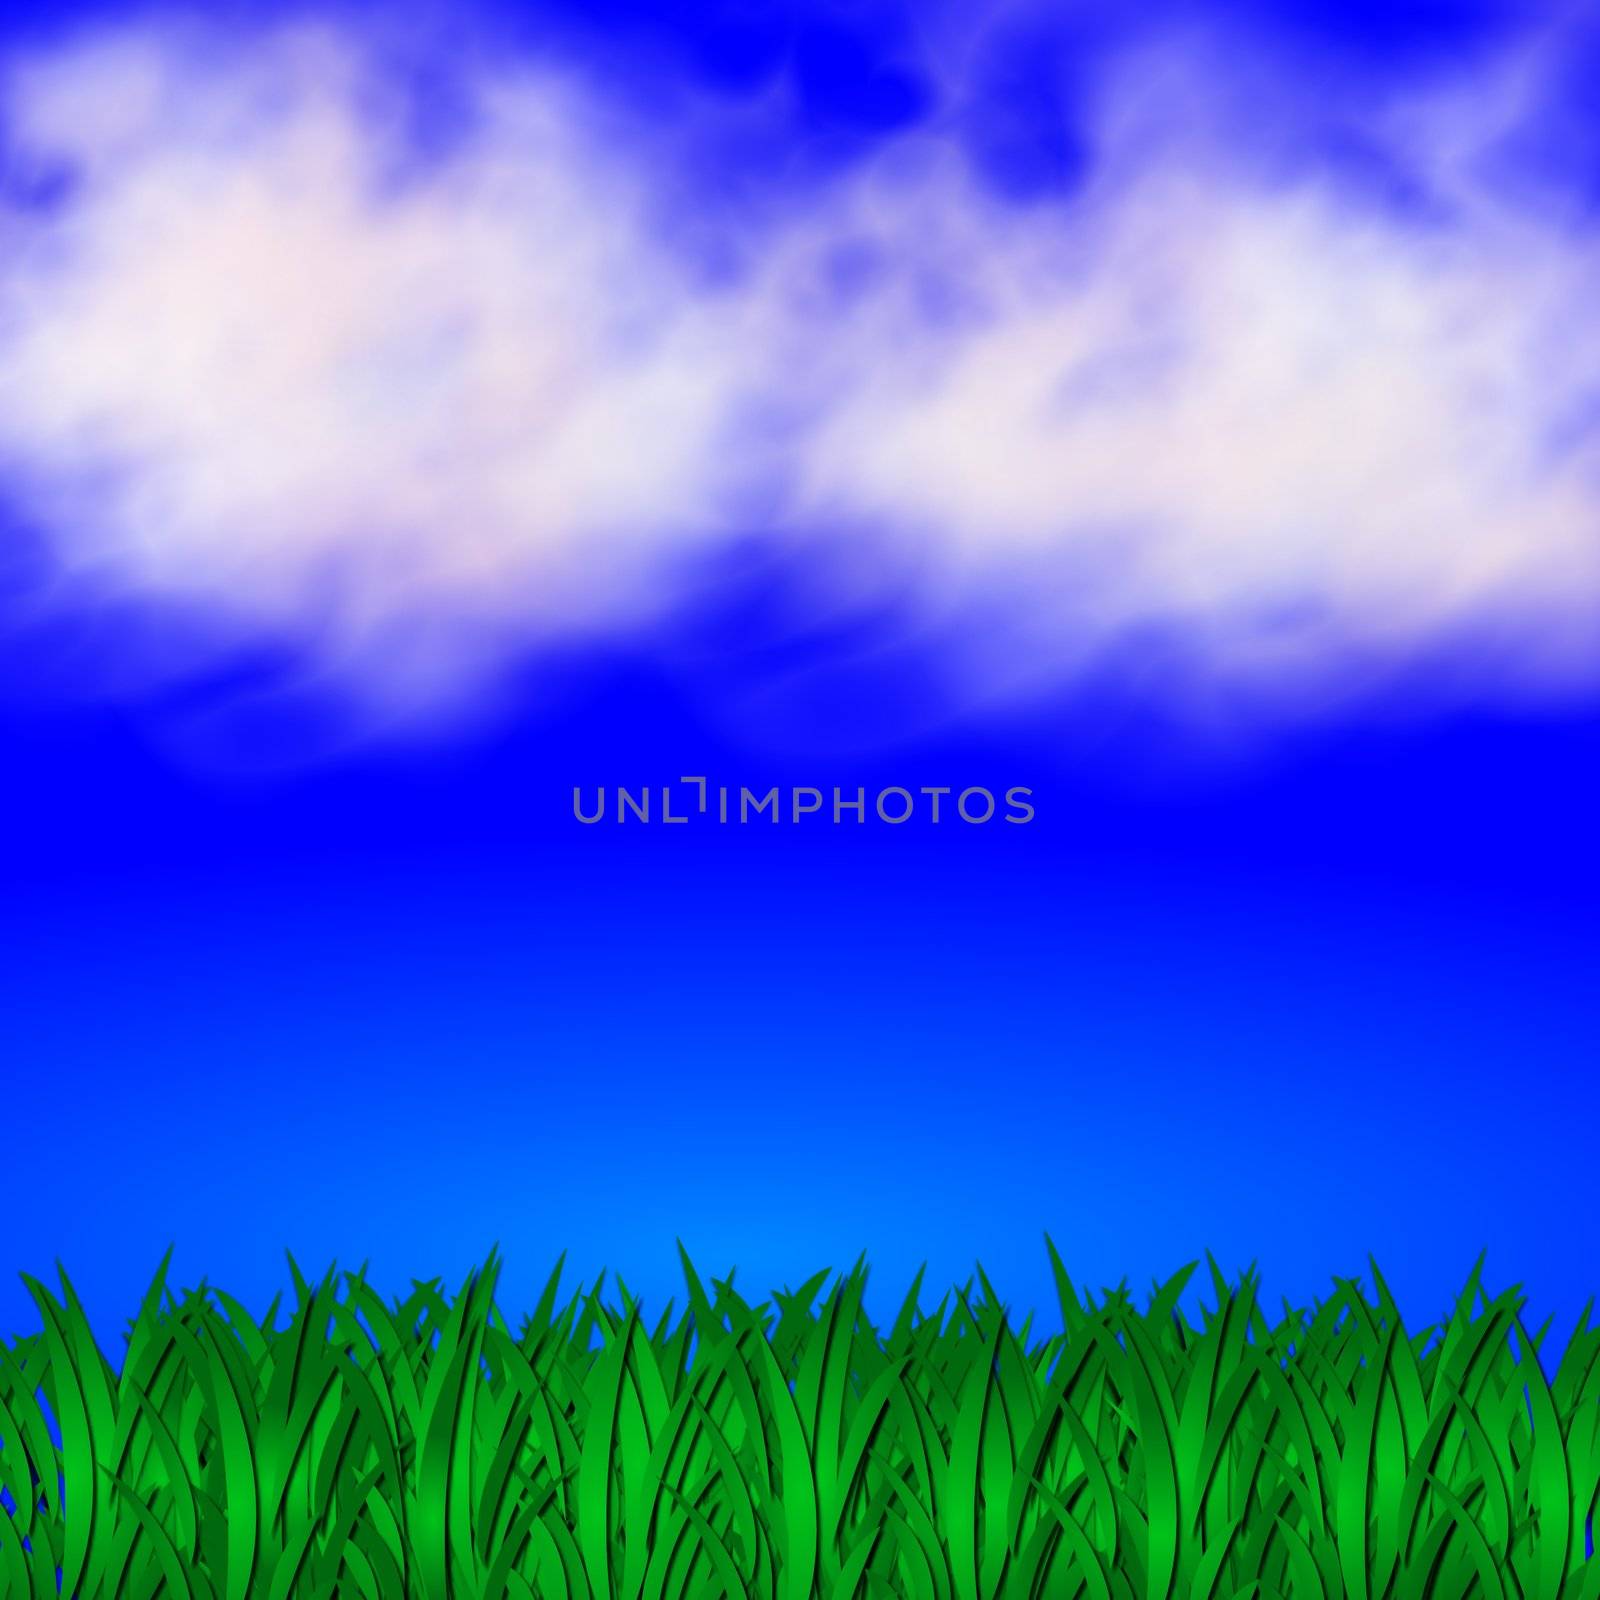 illustration of a blue cloudy sky and fresh green grass